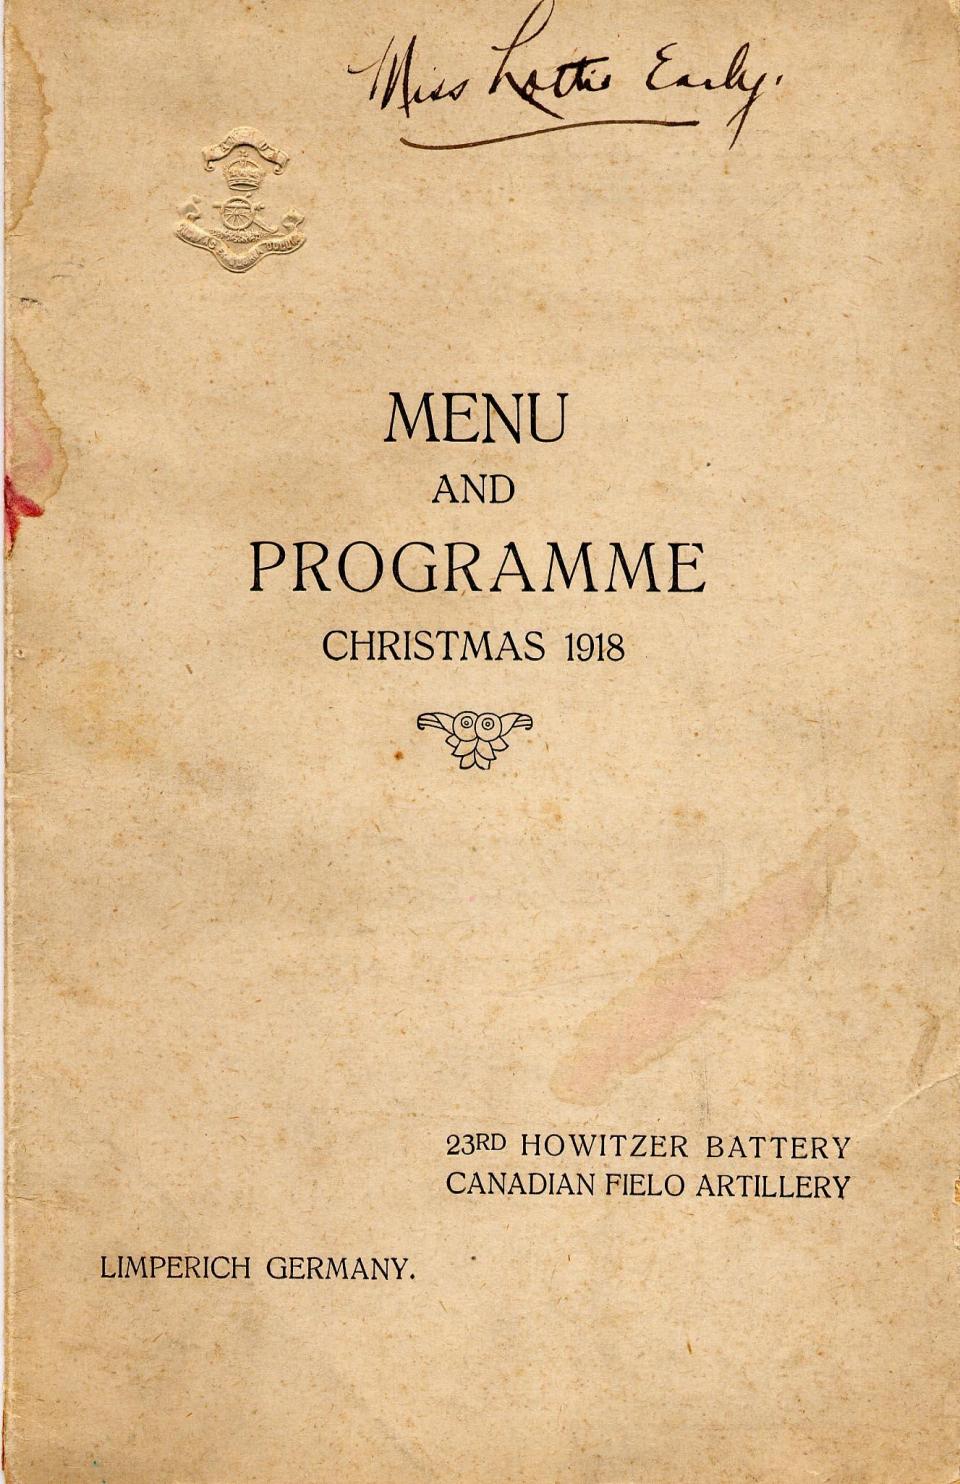 Menu and Programme Christmas 1918 for the 23rd Howitzer Battery